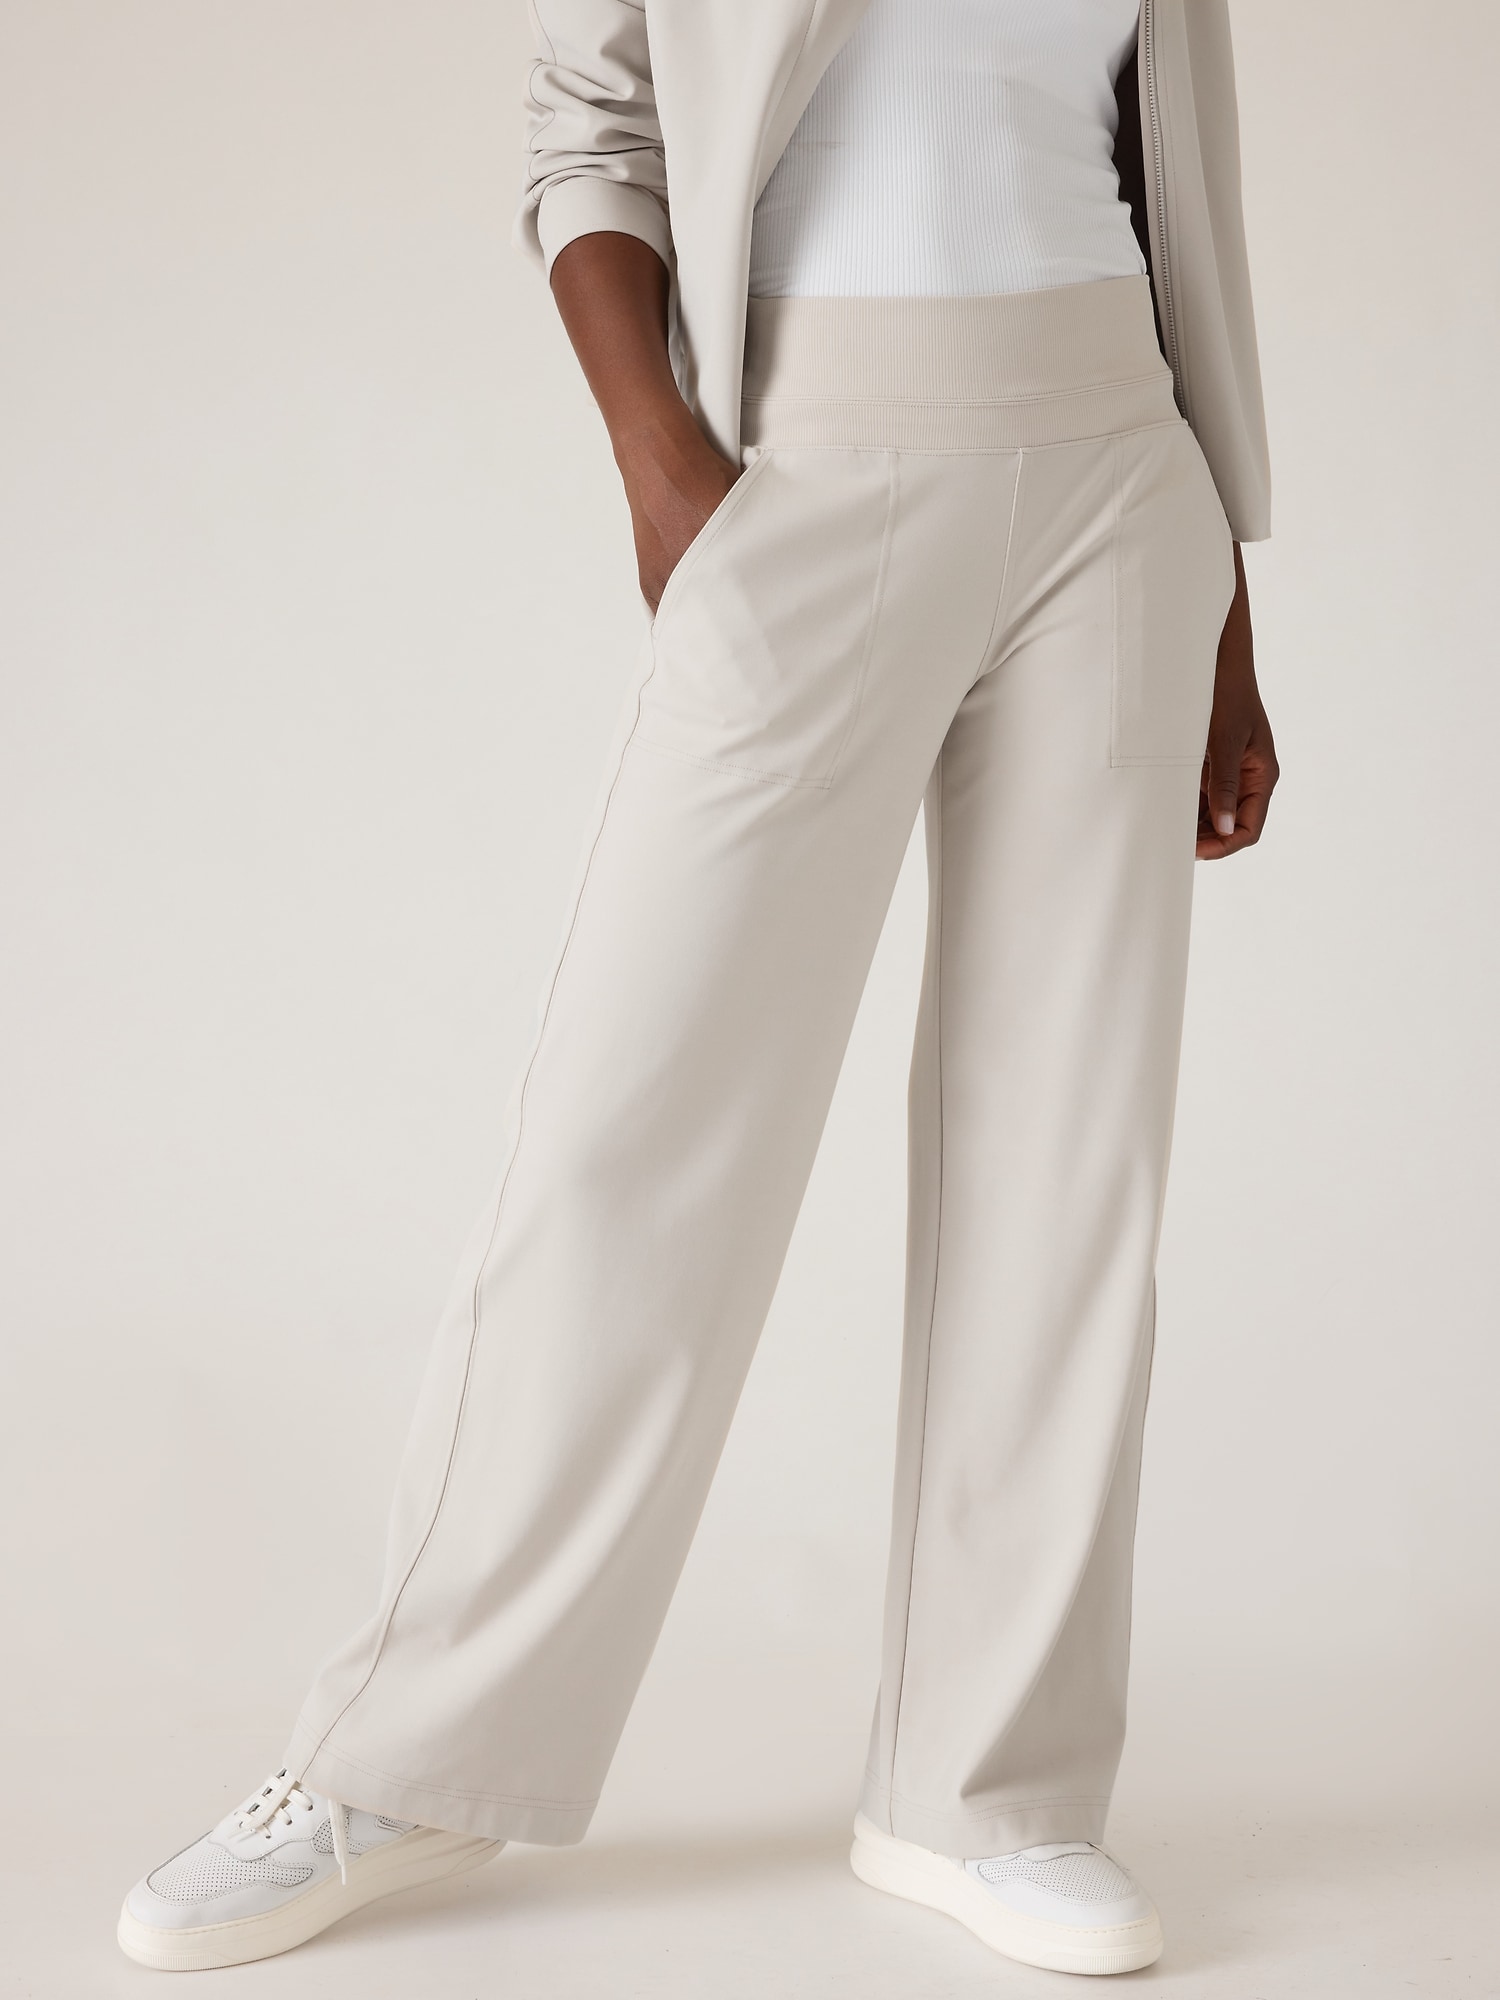 Stretch Woven Wide-Leg High-Rise Cropped Pant. I didn't want to